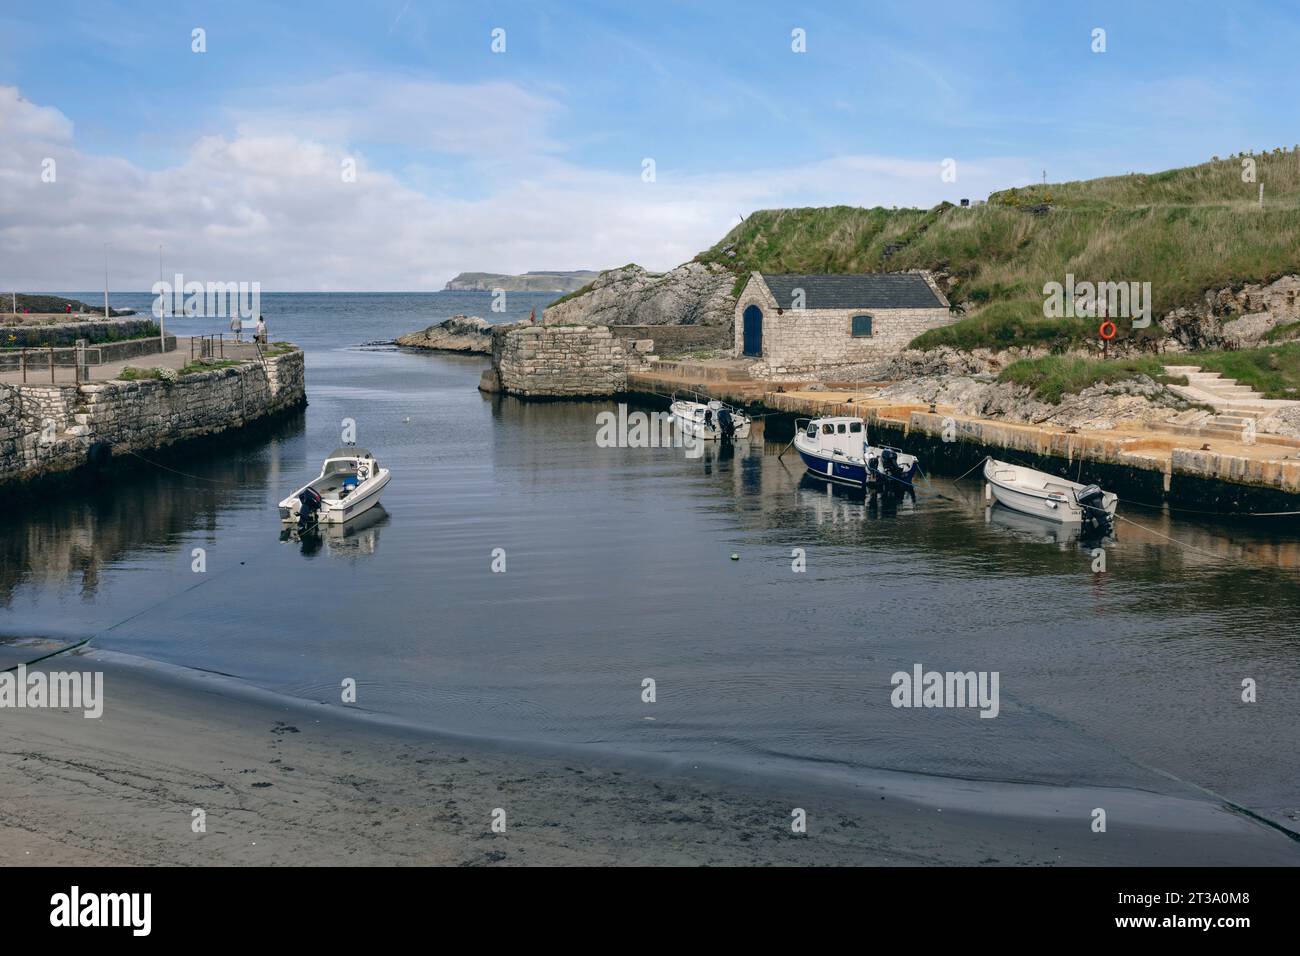 Ballintoy, Northern Ireland is a picturesque fishing village with a dramatic coastline and many sea stacks made of basalt, a type of volcanic rock. Stock Photo